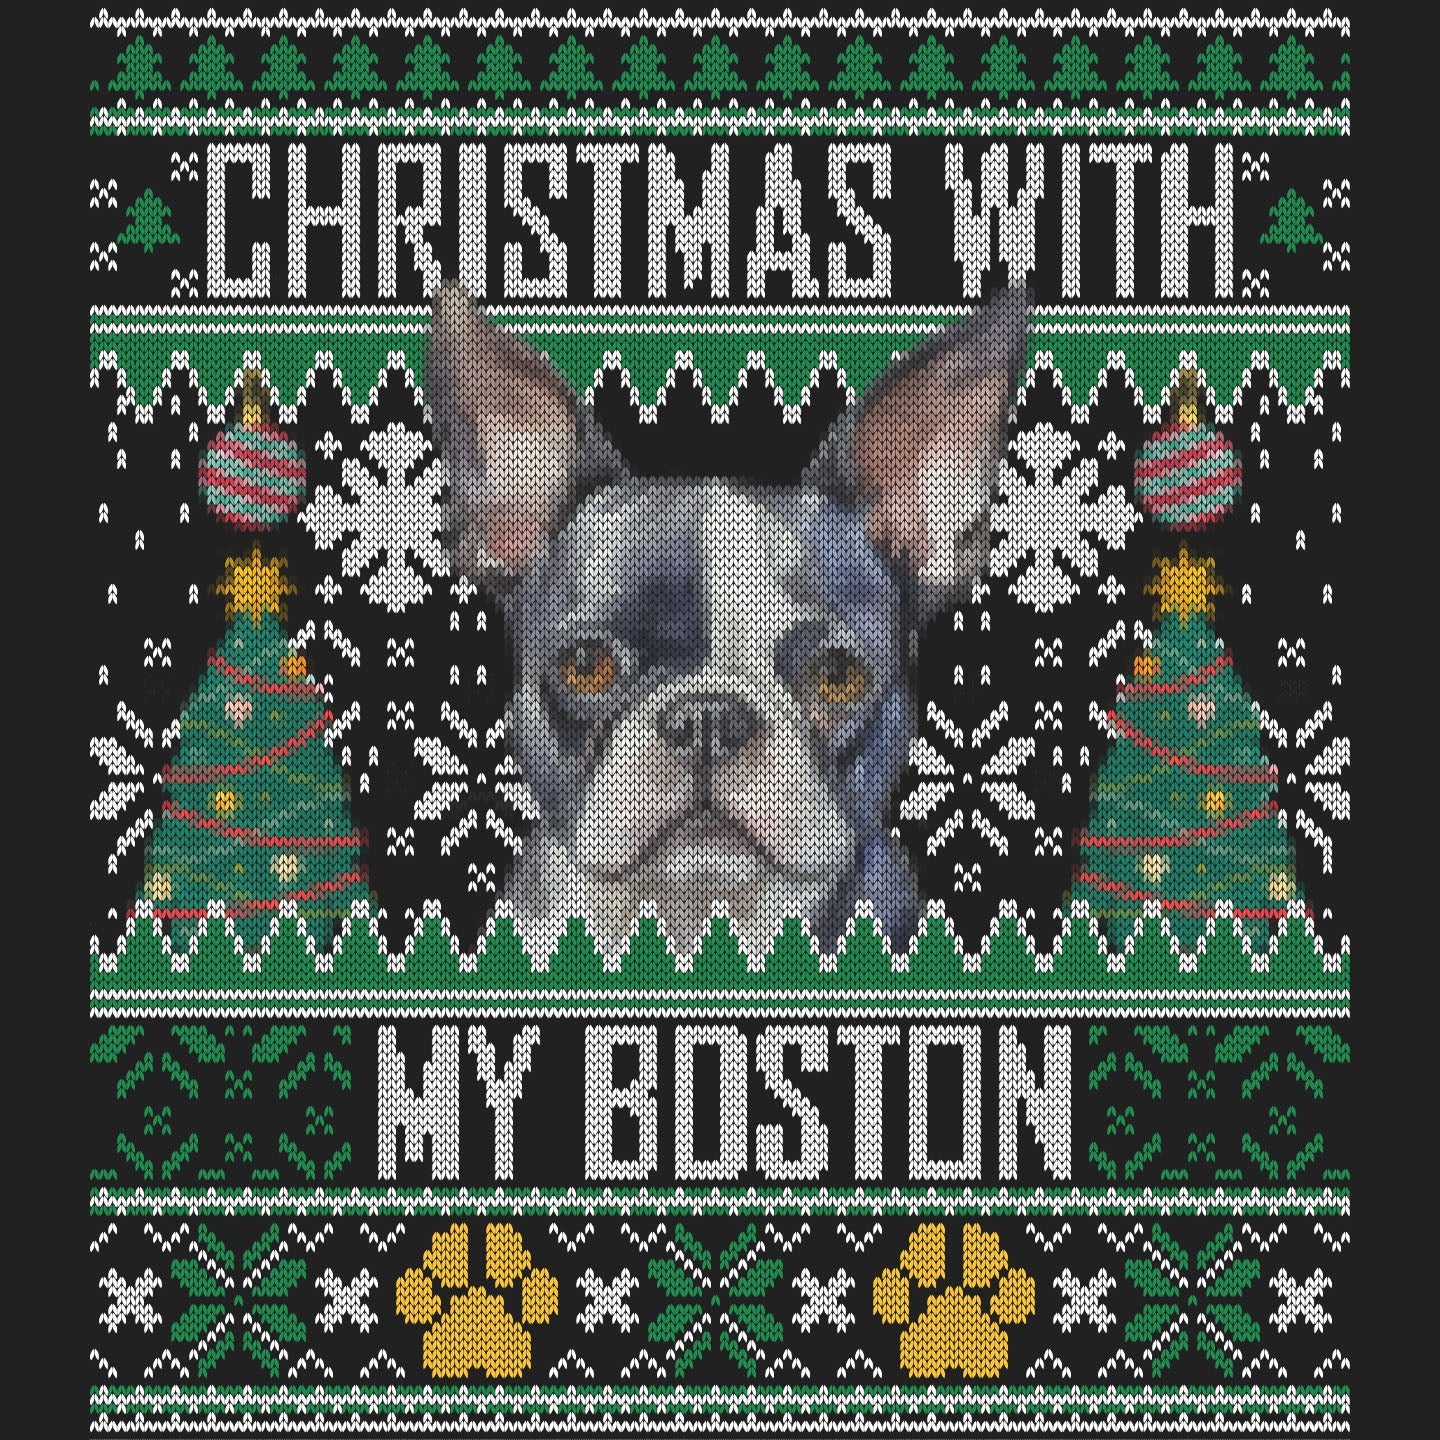 Ugly Sweater Christmas with My Boston Terrier - Women's V-Neck Long Sleeve T-Shirt